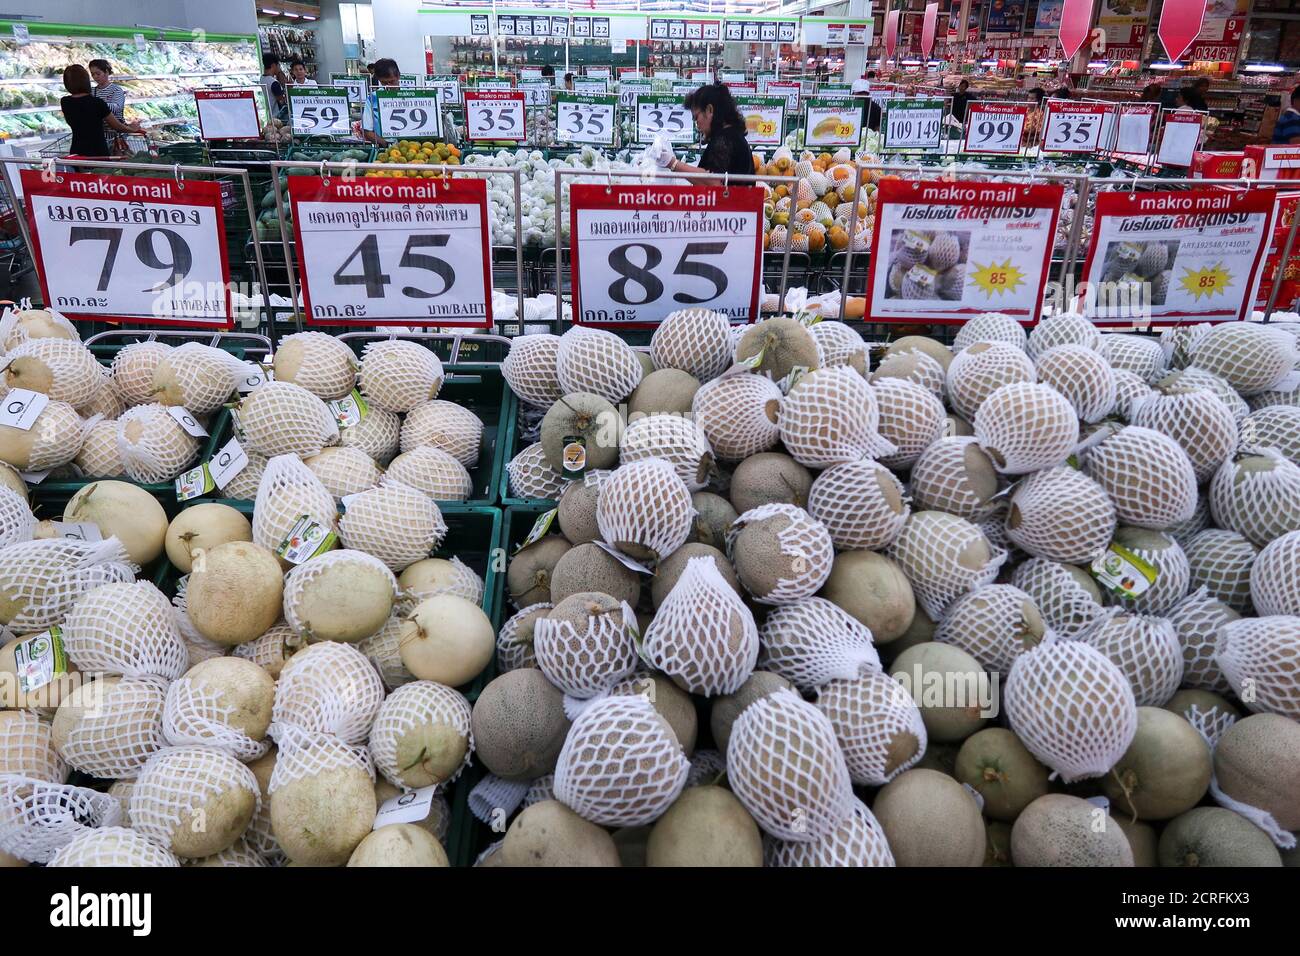 Makro Store High Resolution Stock Photography and Images - Alamy